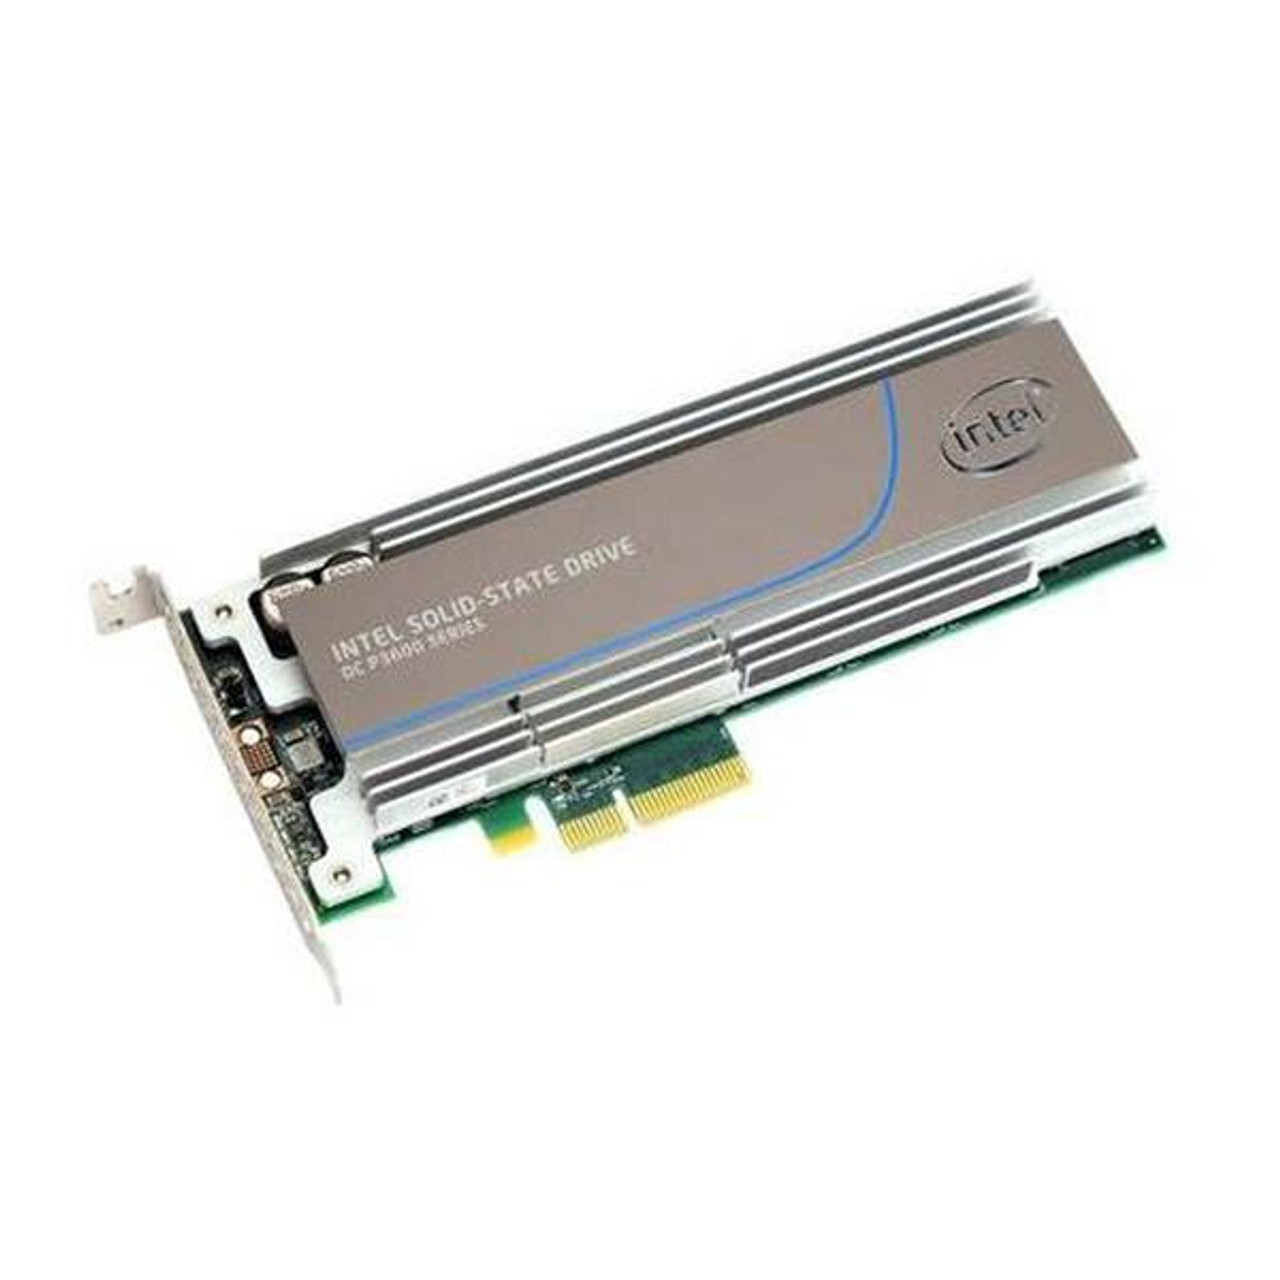 SuperMicro Express Card 2TB Solid State Drive